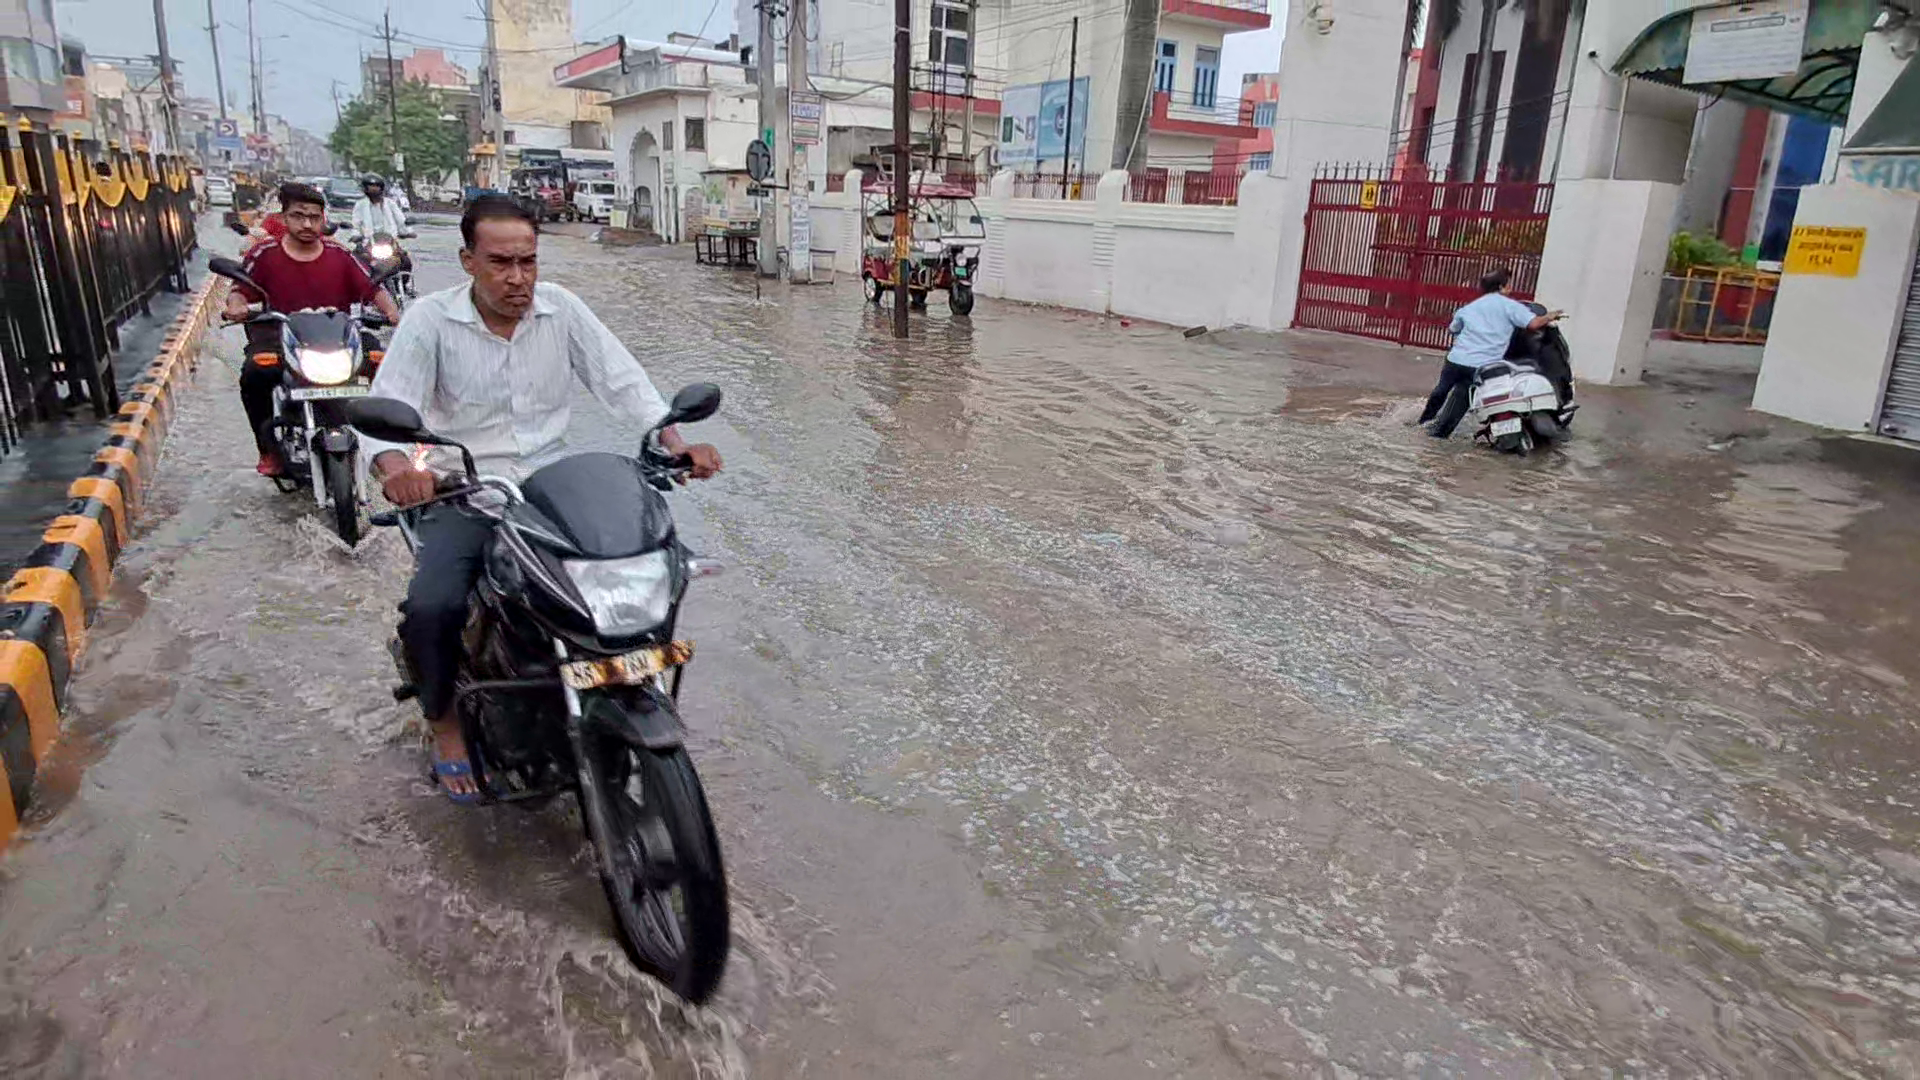 Roads filled with water due to rain in Bhiwani of Haryana people faced problems due to waterlogging in colonies